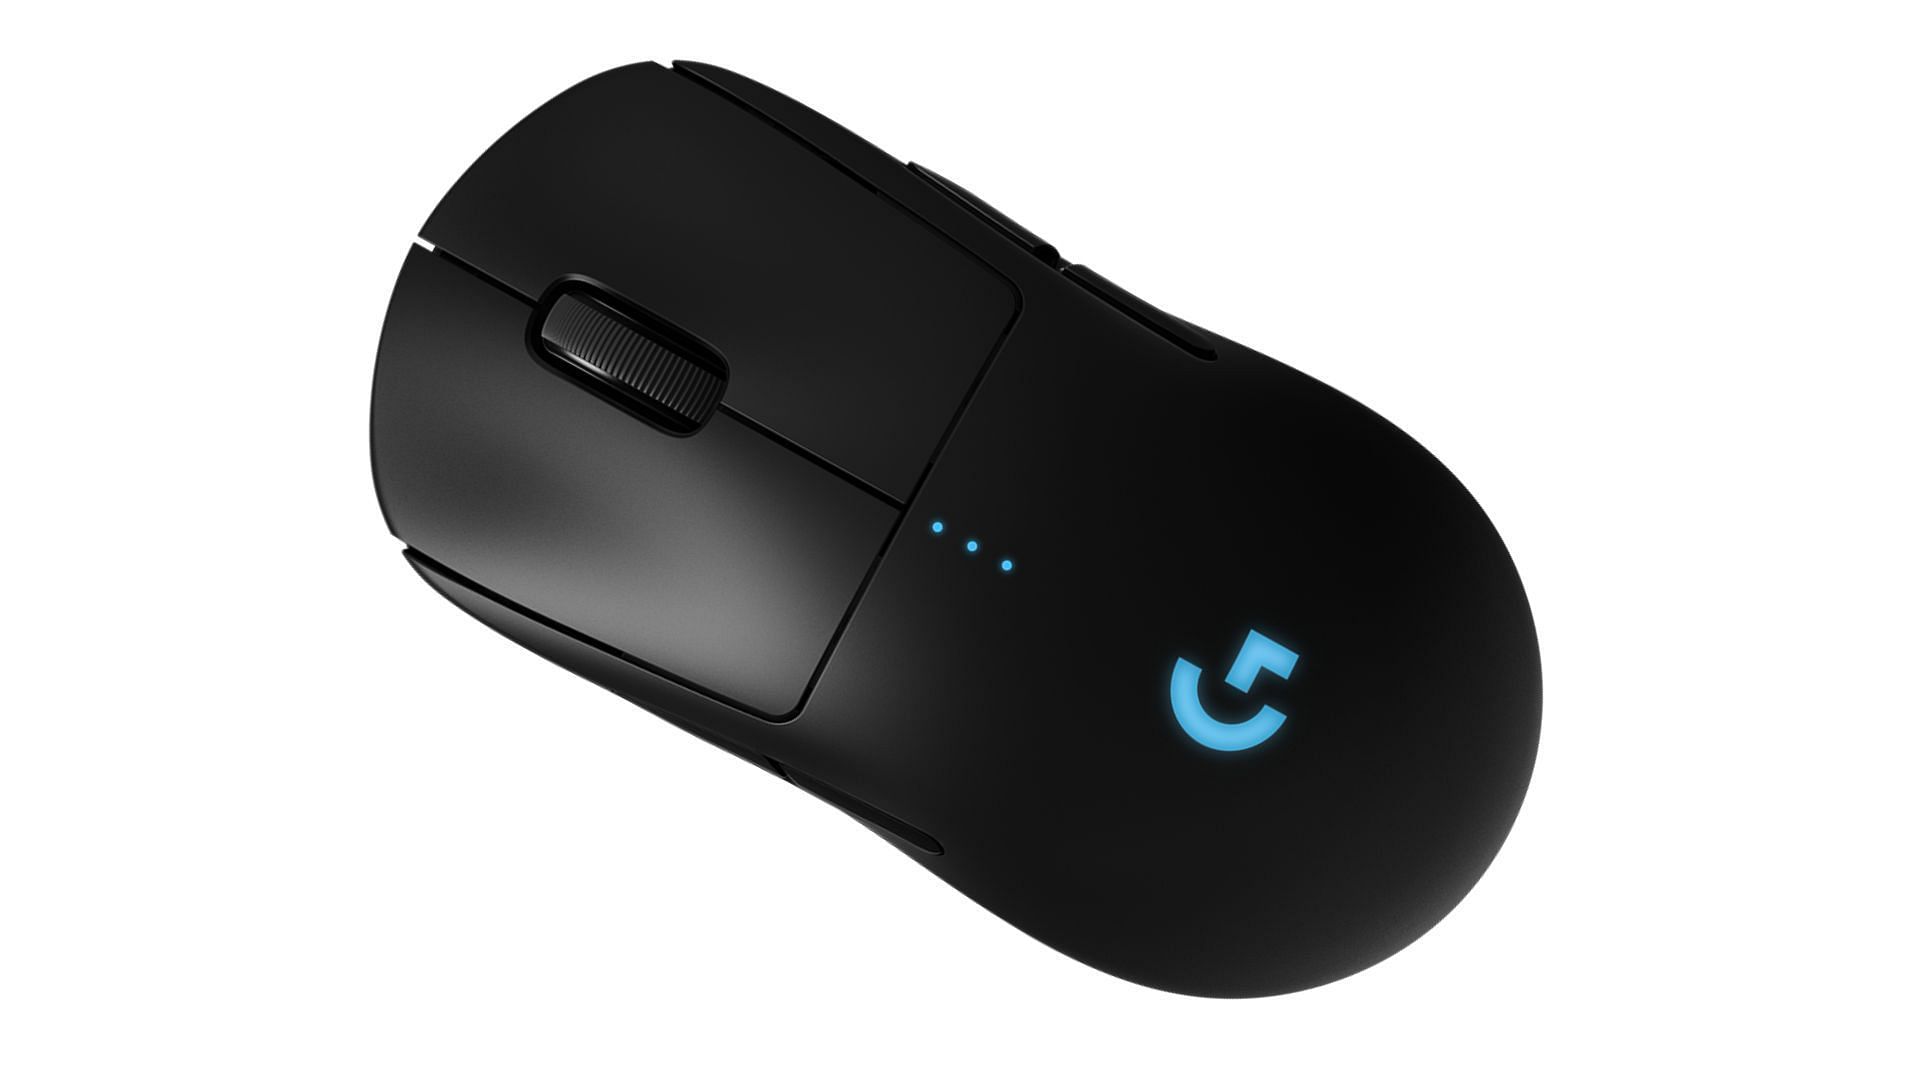 Gaming mouse with ambidextrous design (Image via Logitech)